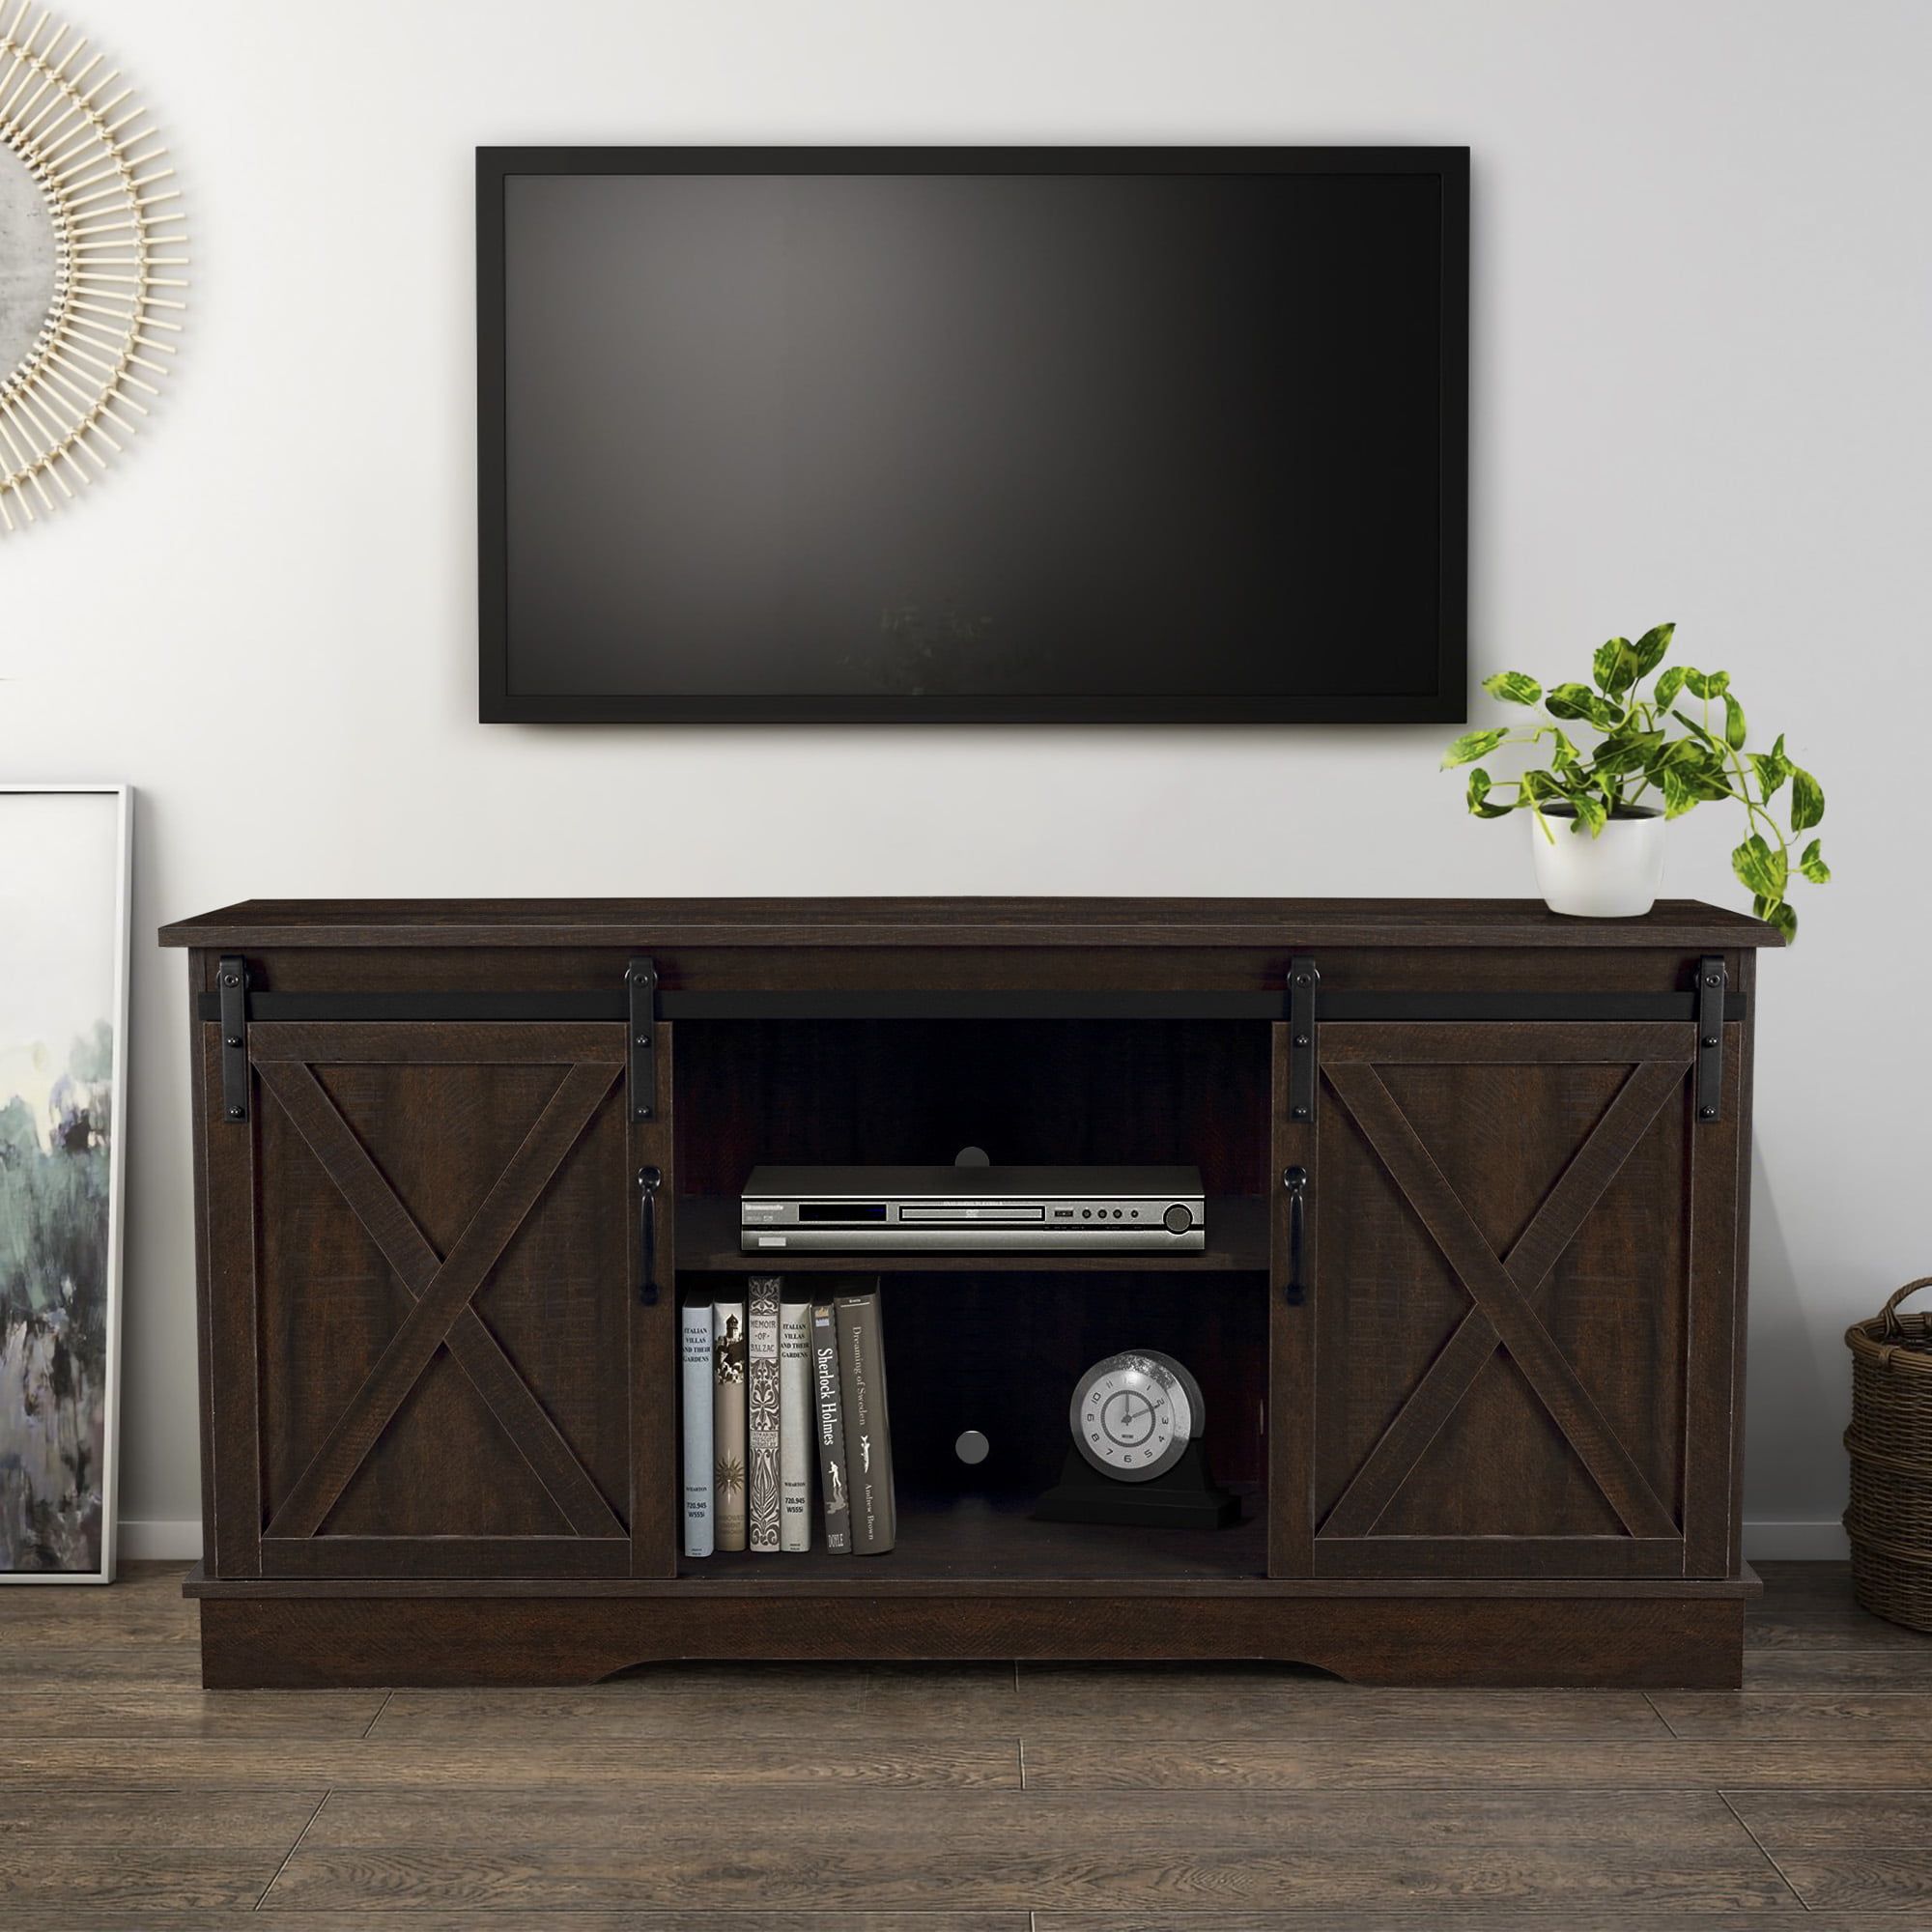 Belleze Modern Farmhouse Style 58 Inch Tv Stand With Sliding Barn Door With Regard To Modern Farmhouse Barn Tv Stands (Gallery 16 of 20)